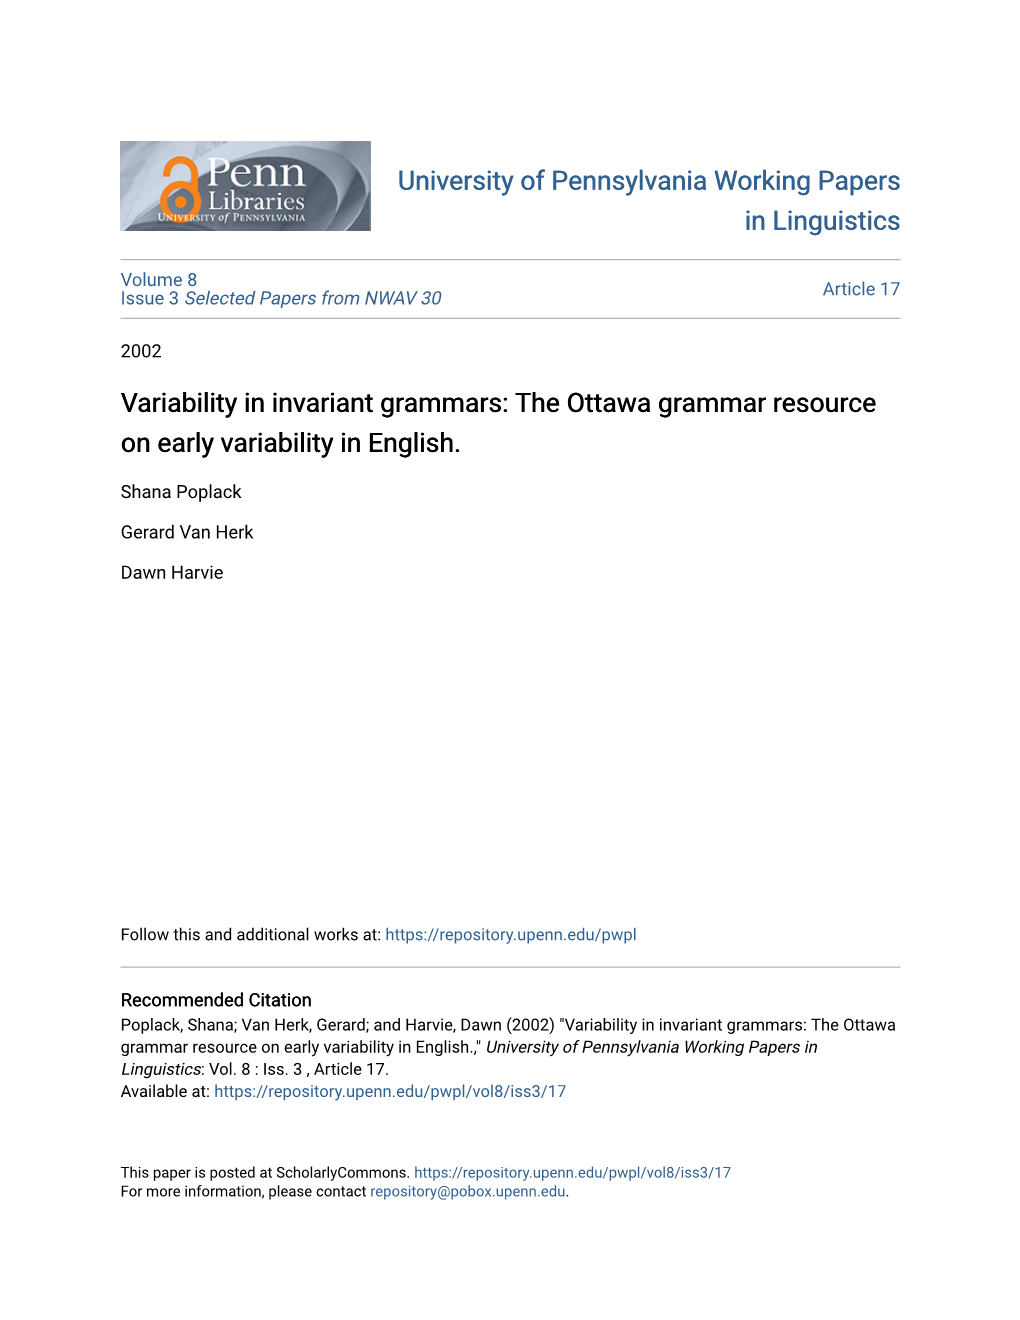 The Ottawa Grammar Resource on Early Variability in English